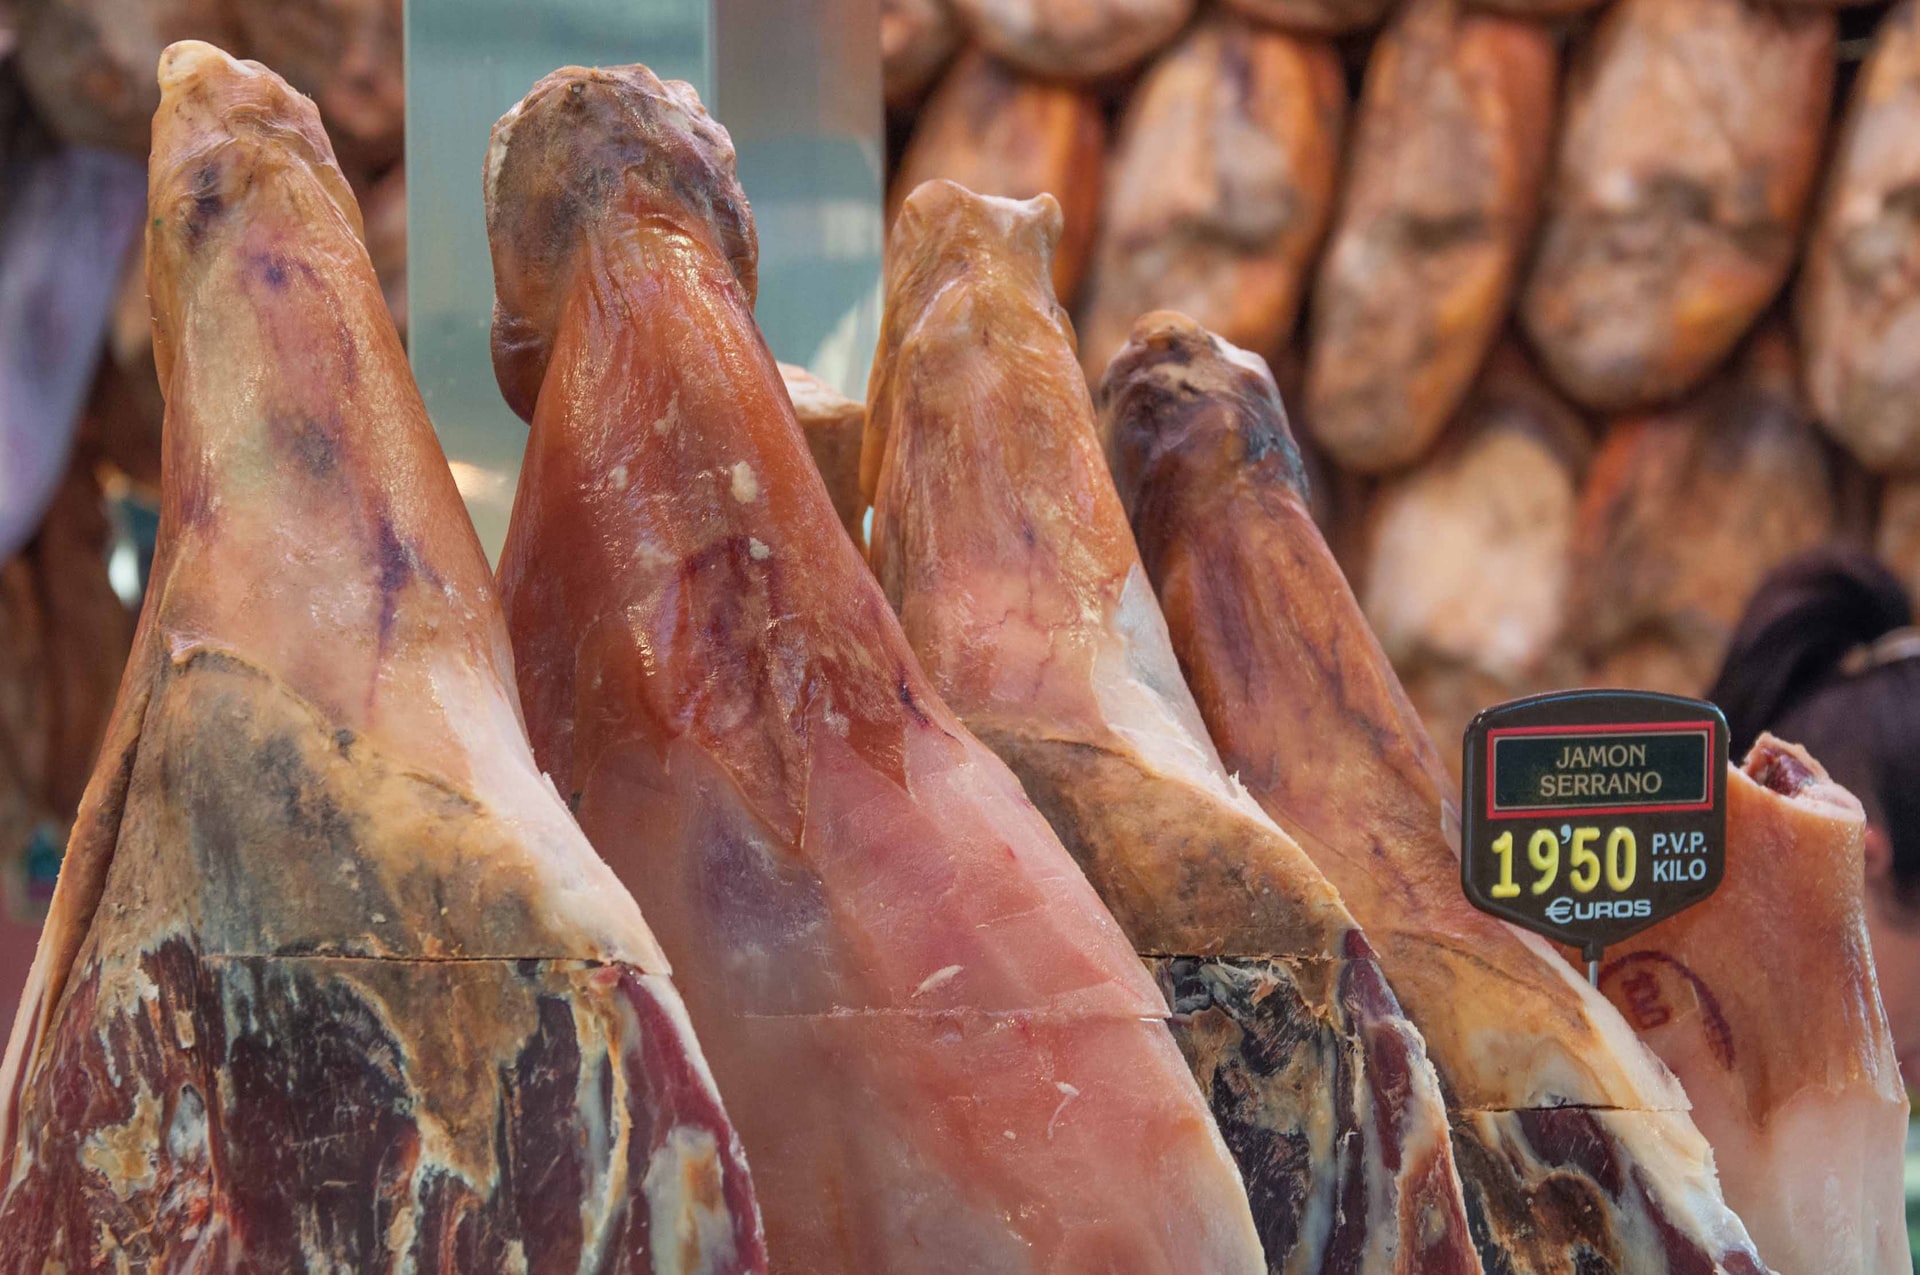 Meat Prices, Cybersecurity Concerns Surging as Grilling Season Arrives and Supply Chain Issues Escalate